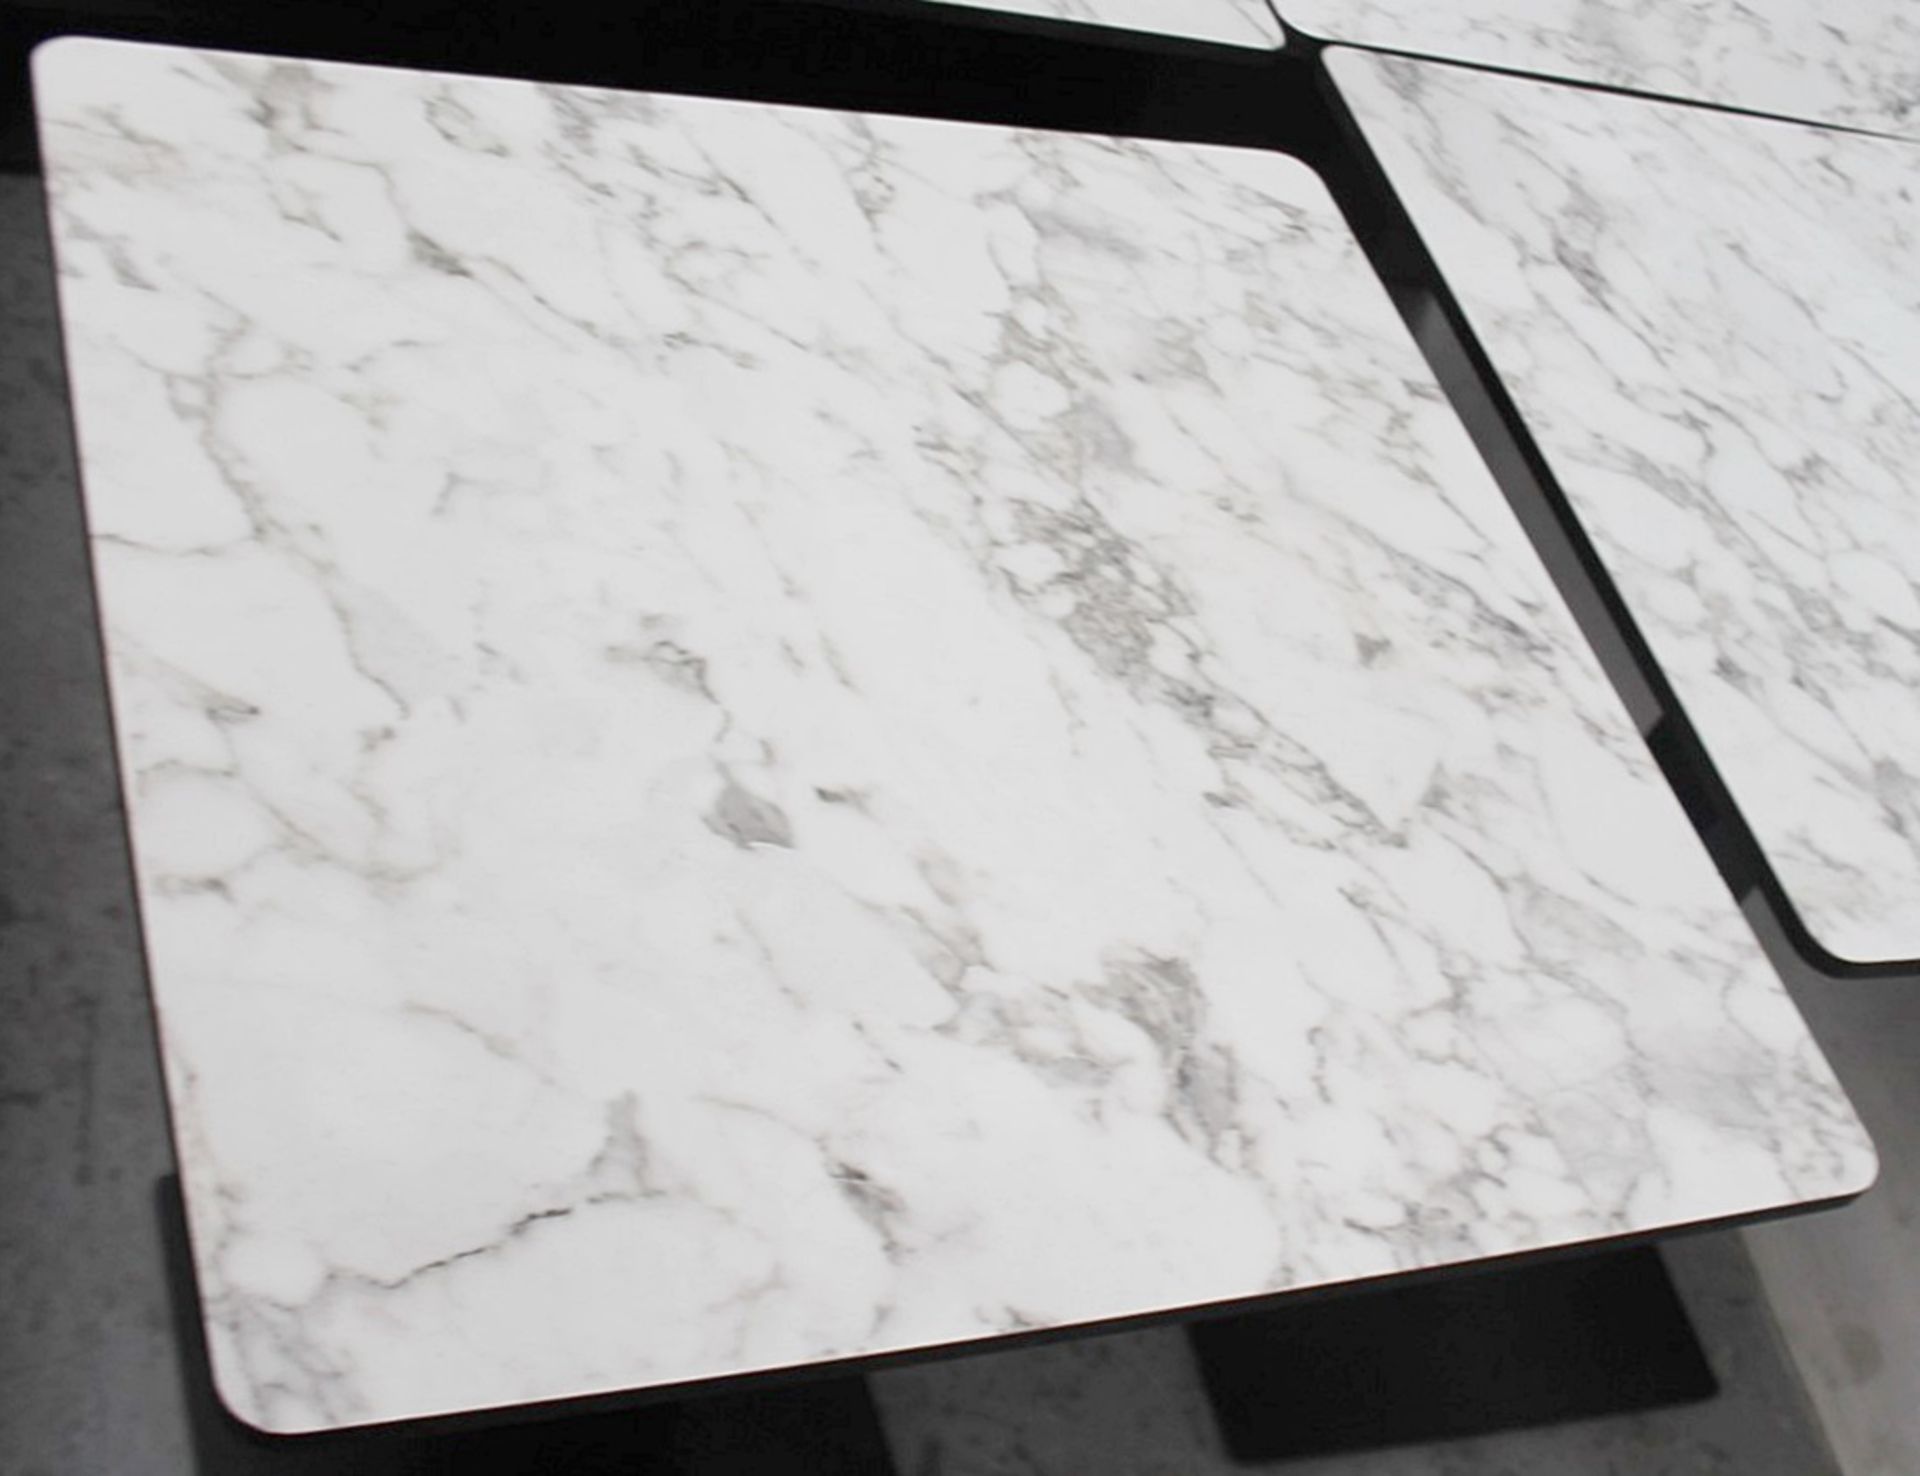 4 x Bistro Tables Featuring 'EXTREMA' Heavy-duty Tops With A White Marble-Style Finish, And Robust - Image 3 of 5